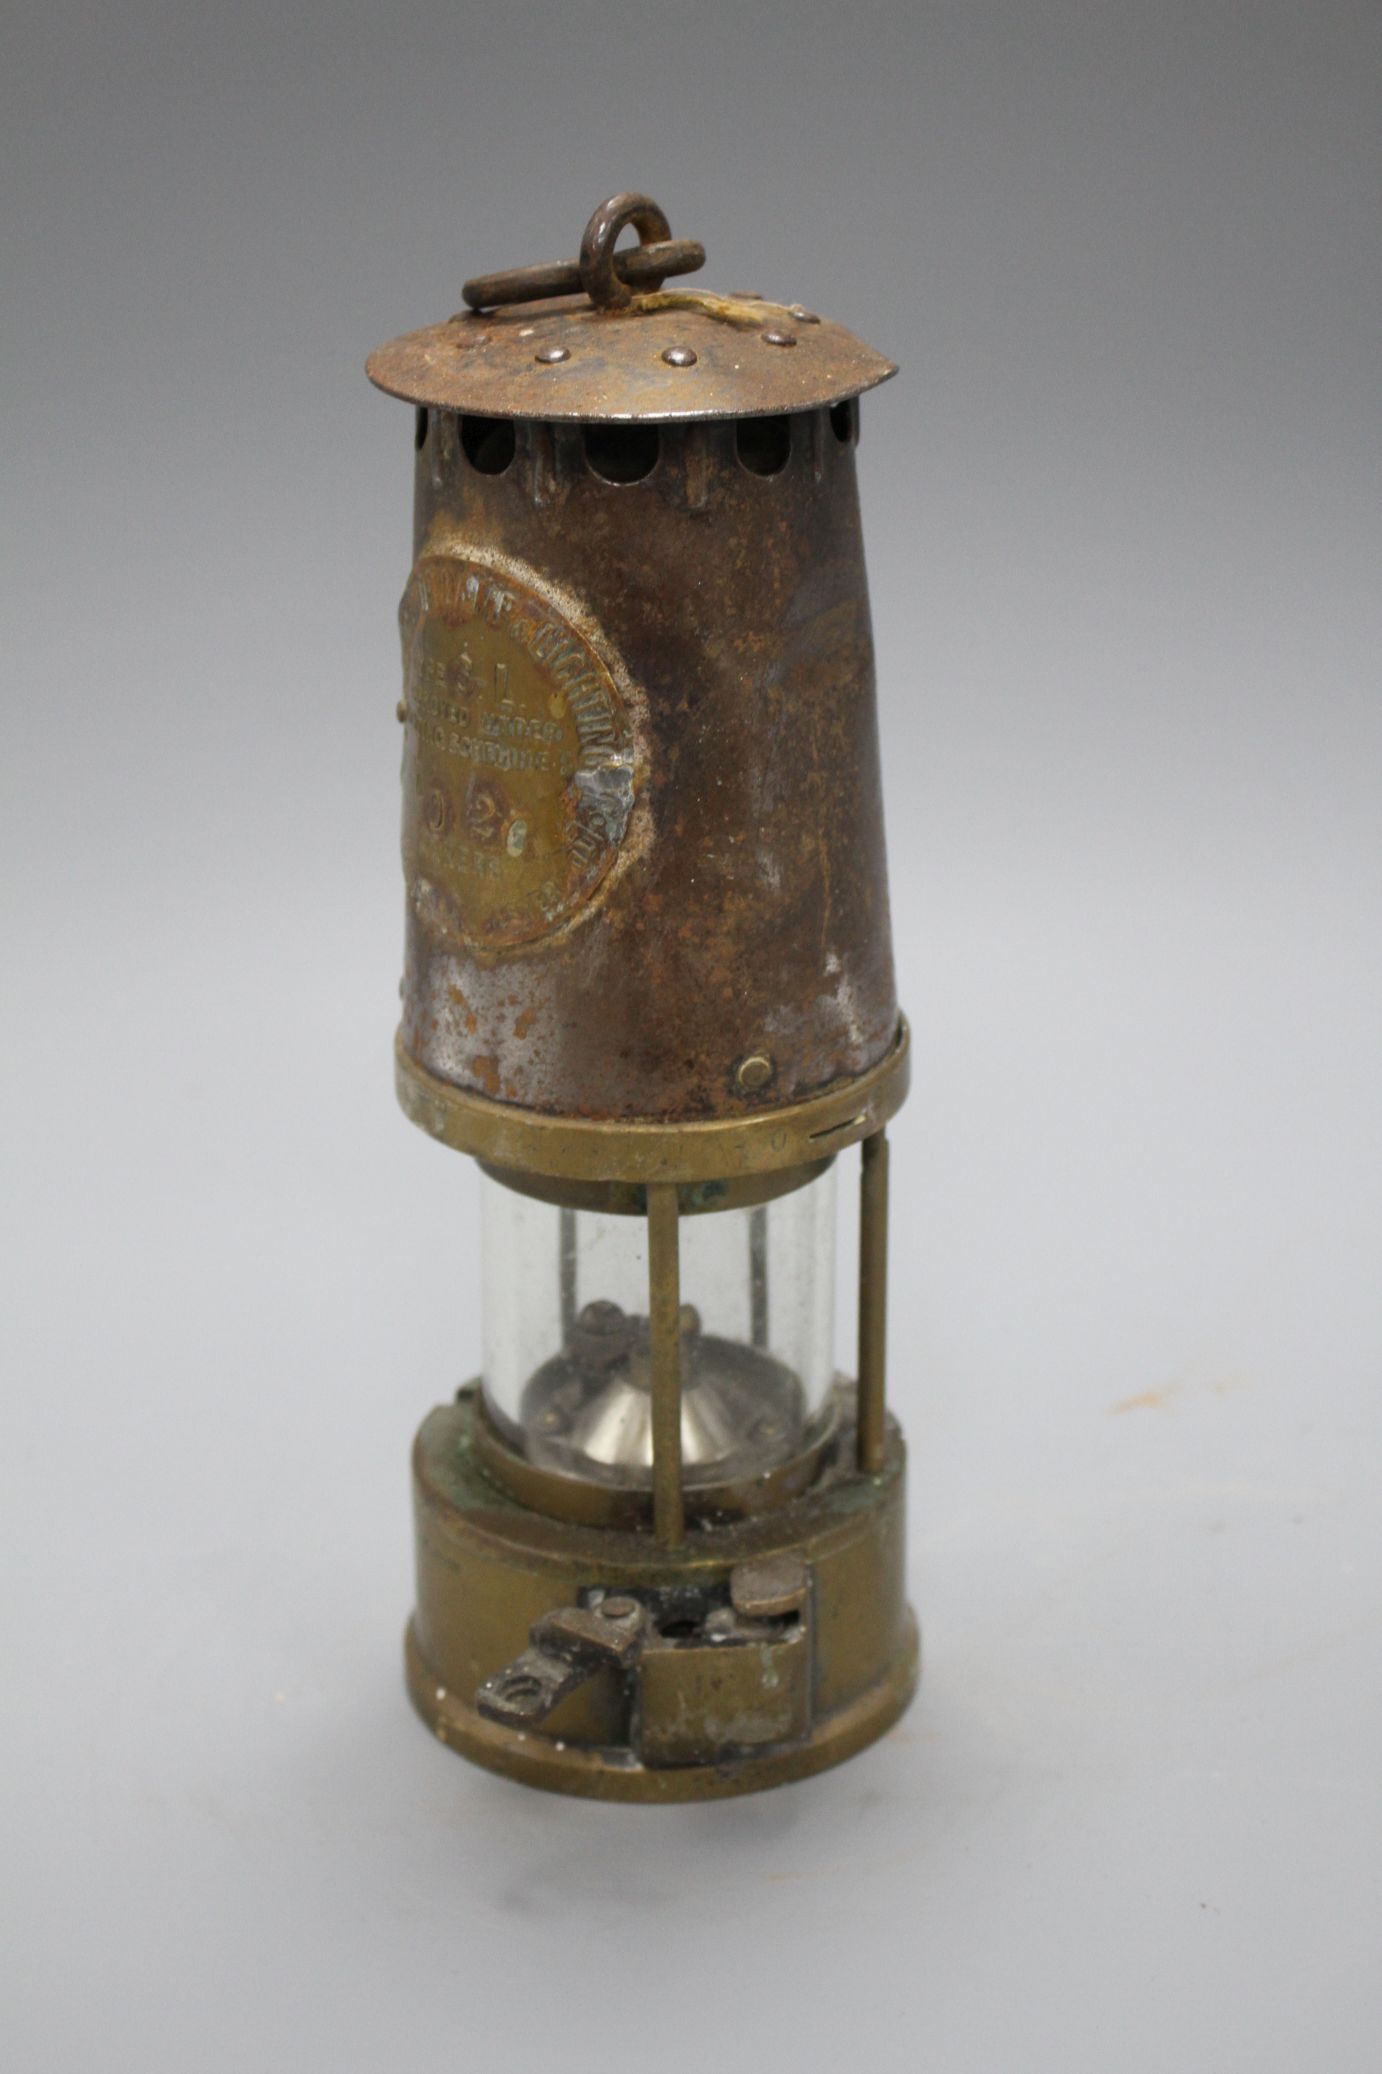 The Protector Lamp and Lighting Co Limited miner's lamp, type S-L number 02926?, height 24.5cm - Image 2 of 3